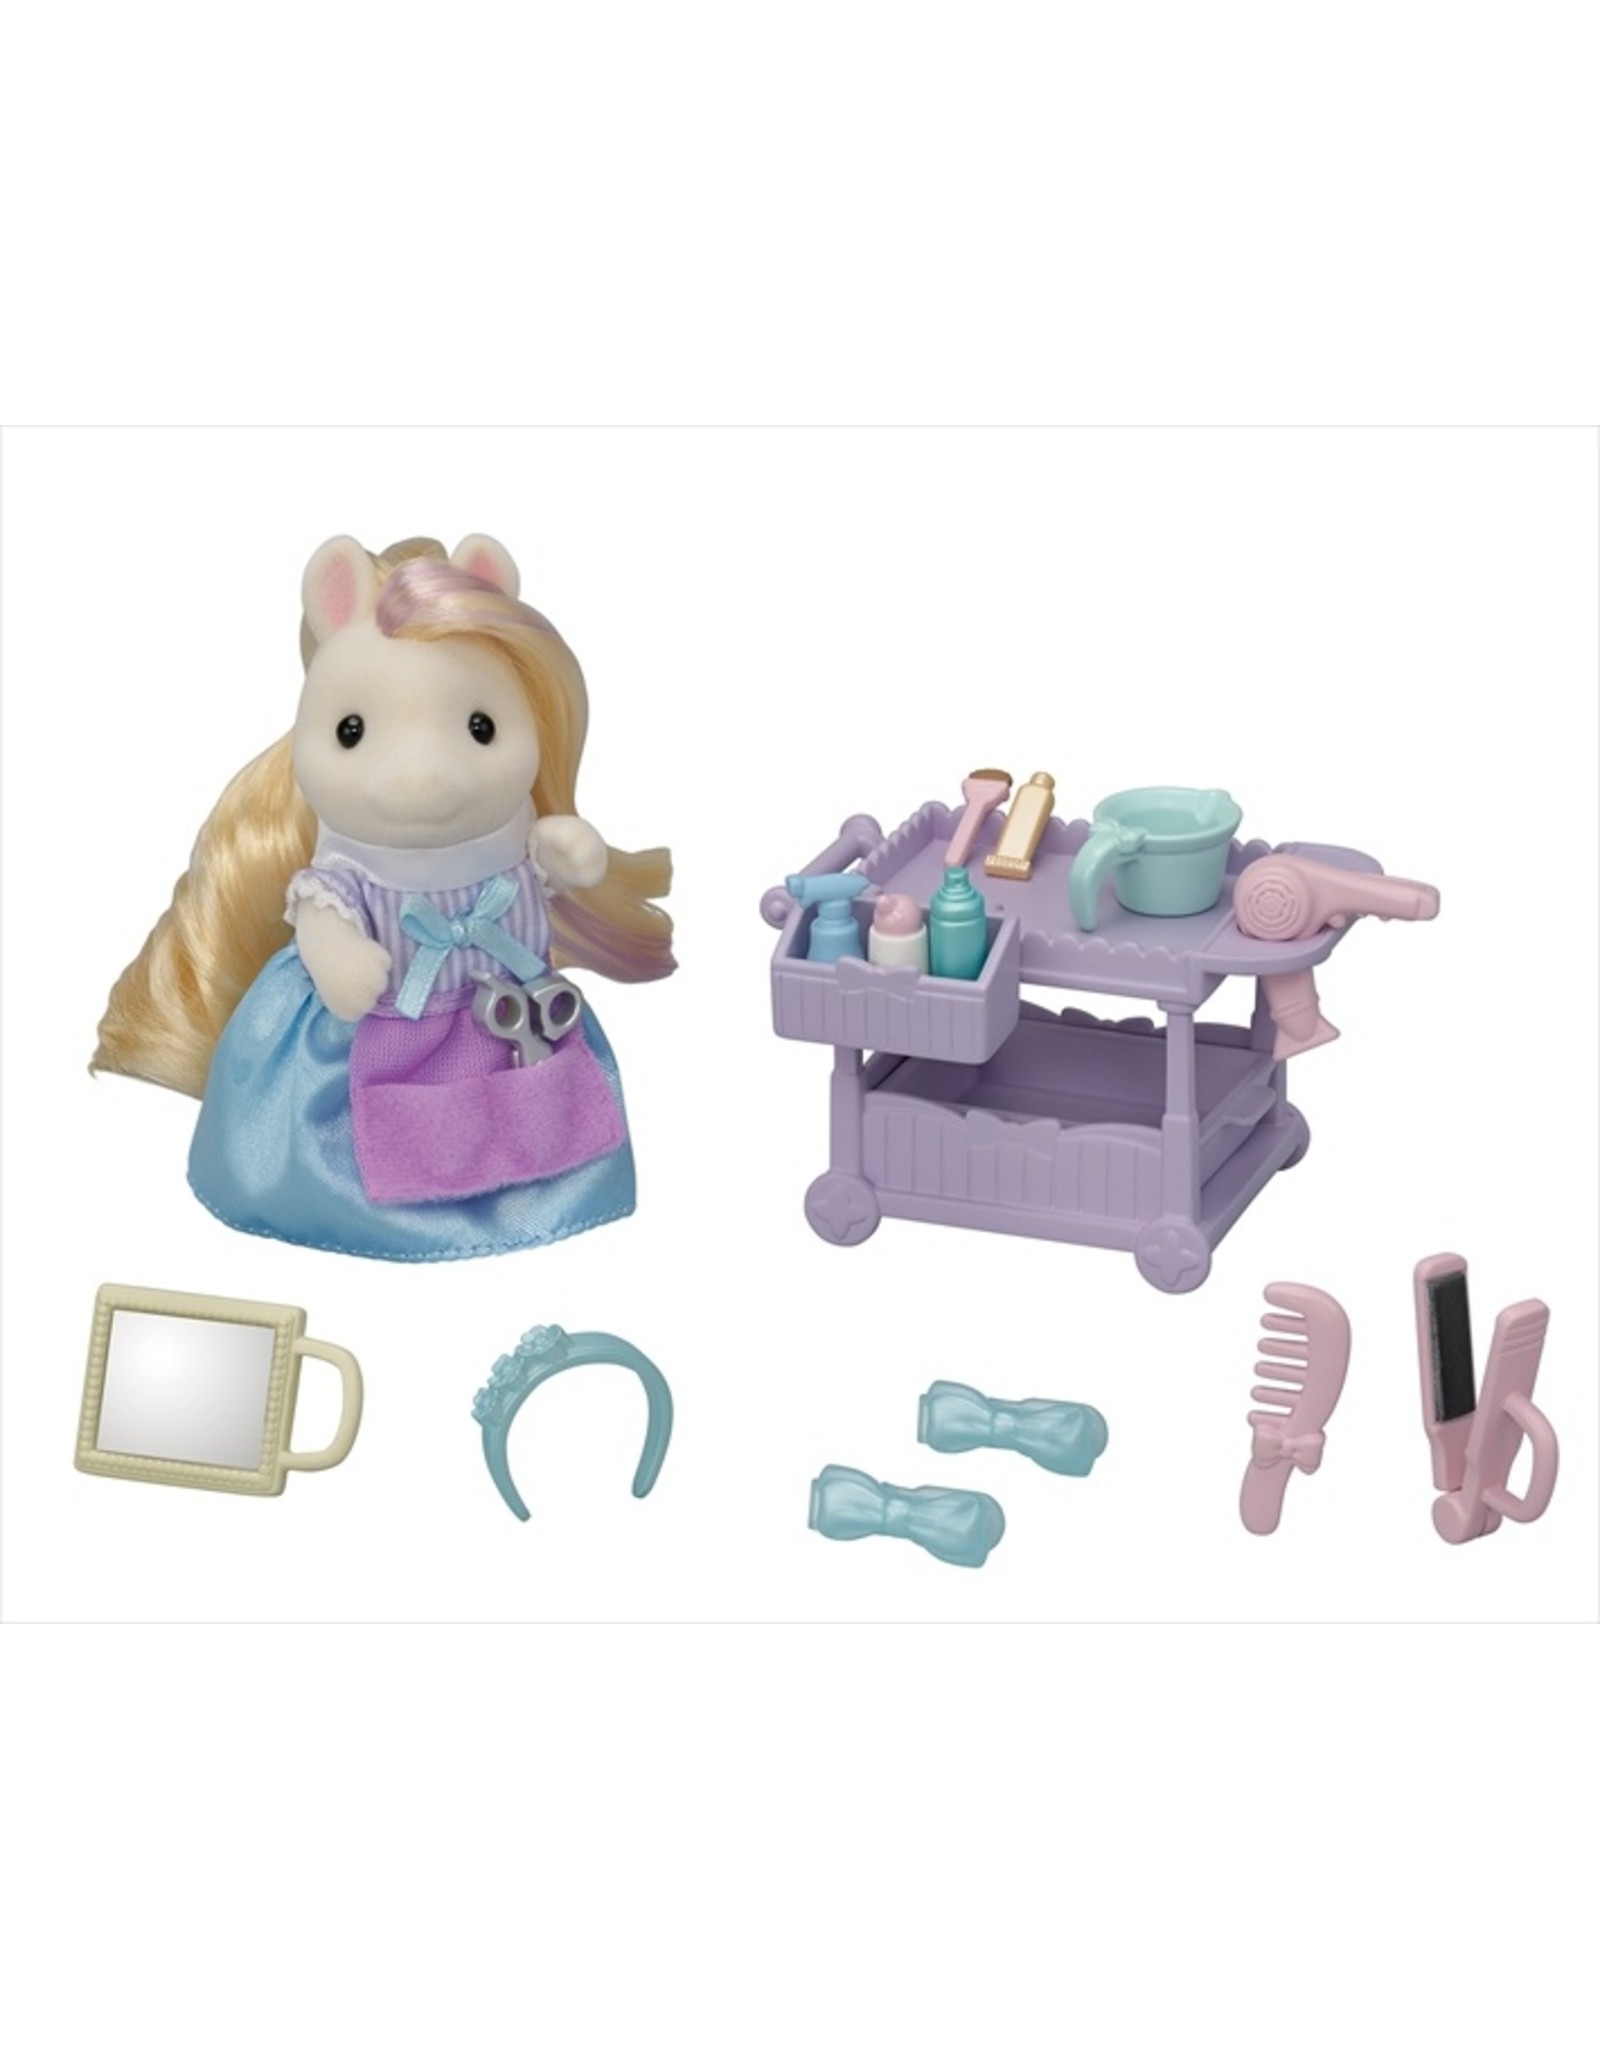 Calico Critters Calico Critters Pony's Hair Stylist Set